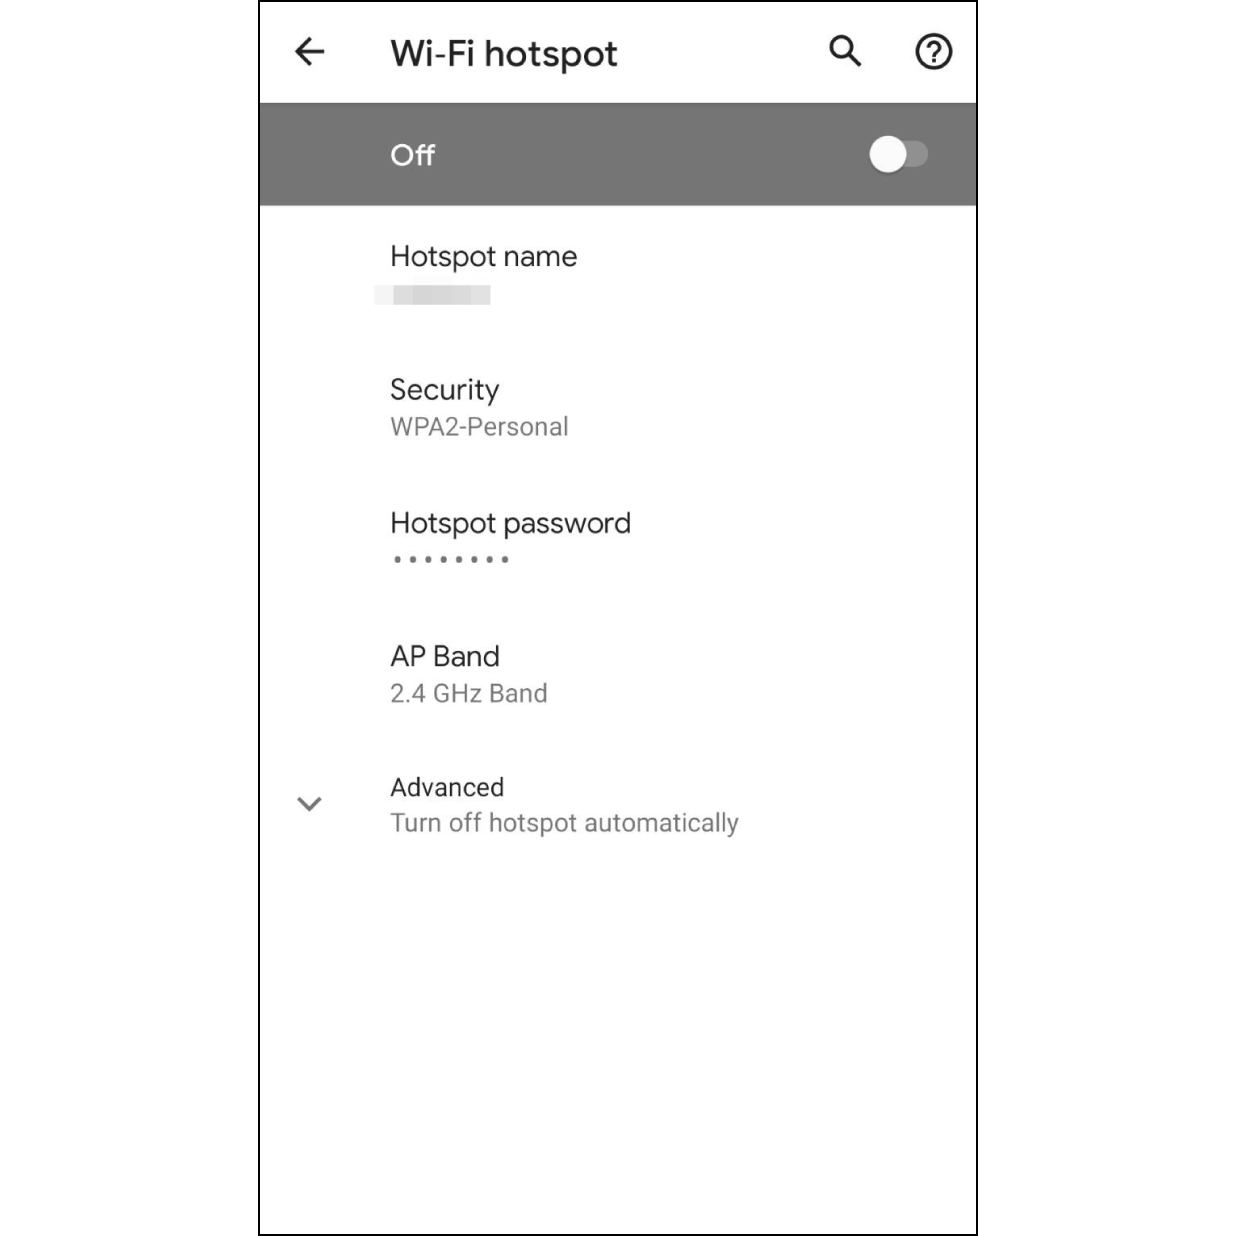 1.Set up Android Hotspot. Go to settings and set up Android hotspot name and password, then turn off the hotspot for now. (How to setup Android hotspot)